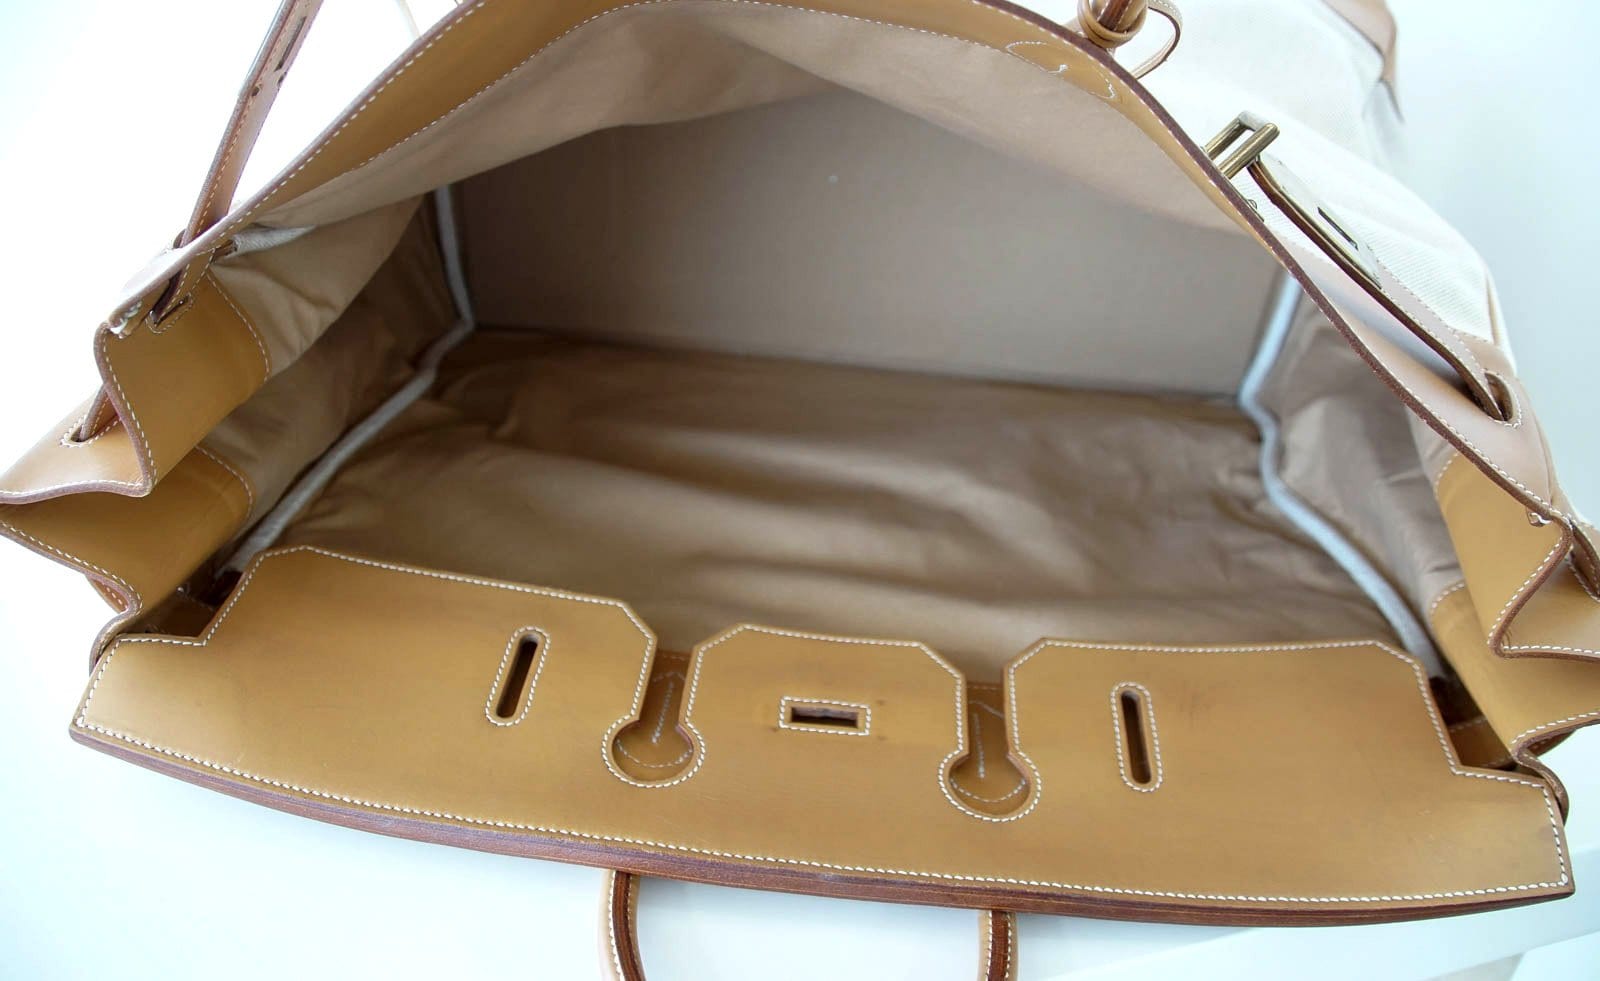 Vintage French Authentic Hermes HAC 55 Bag 1983